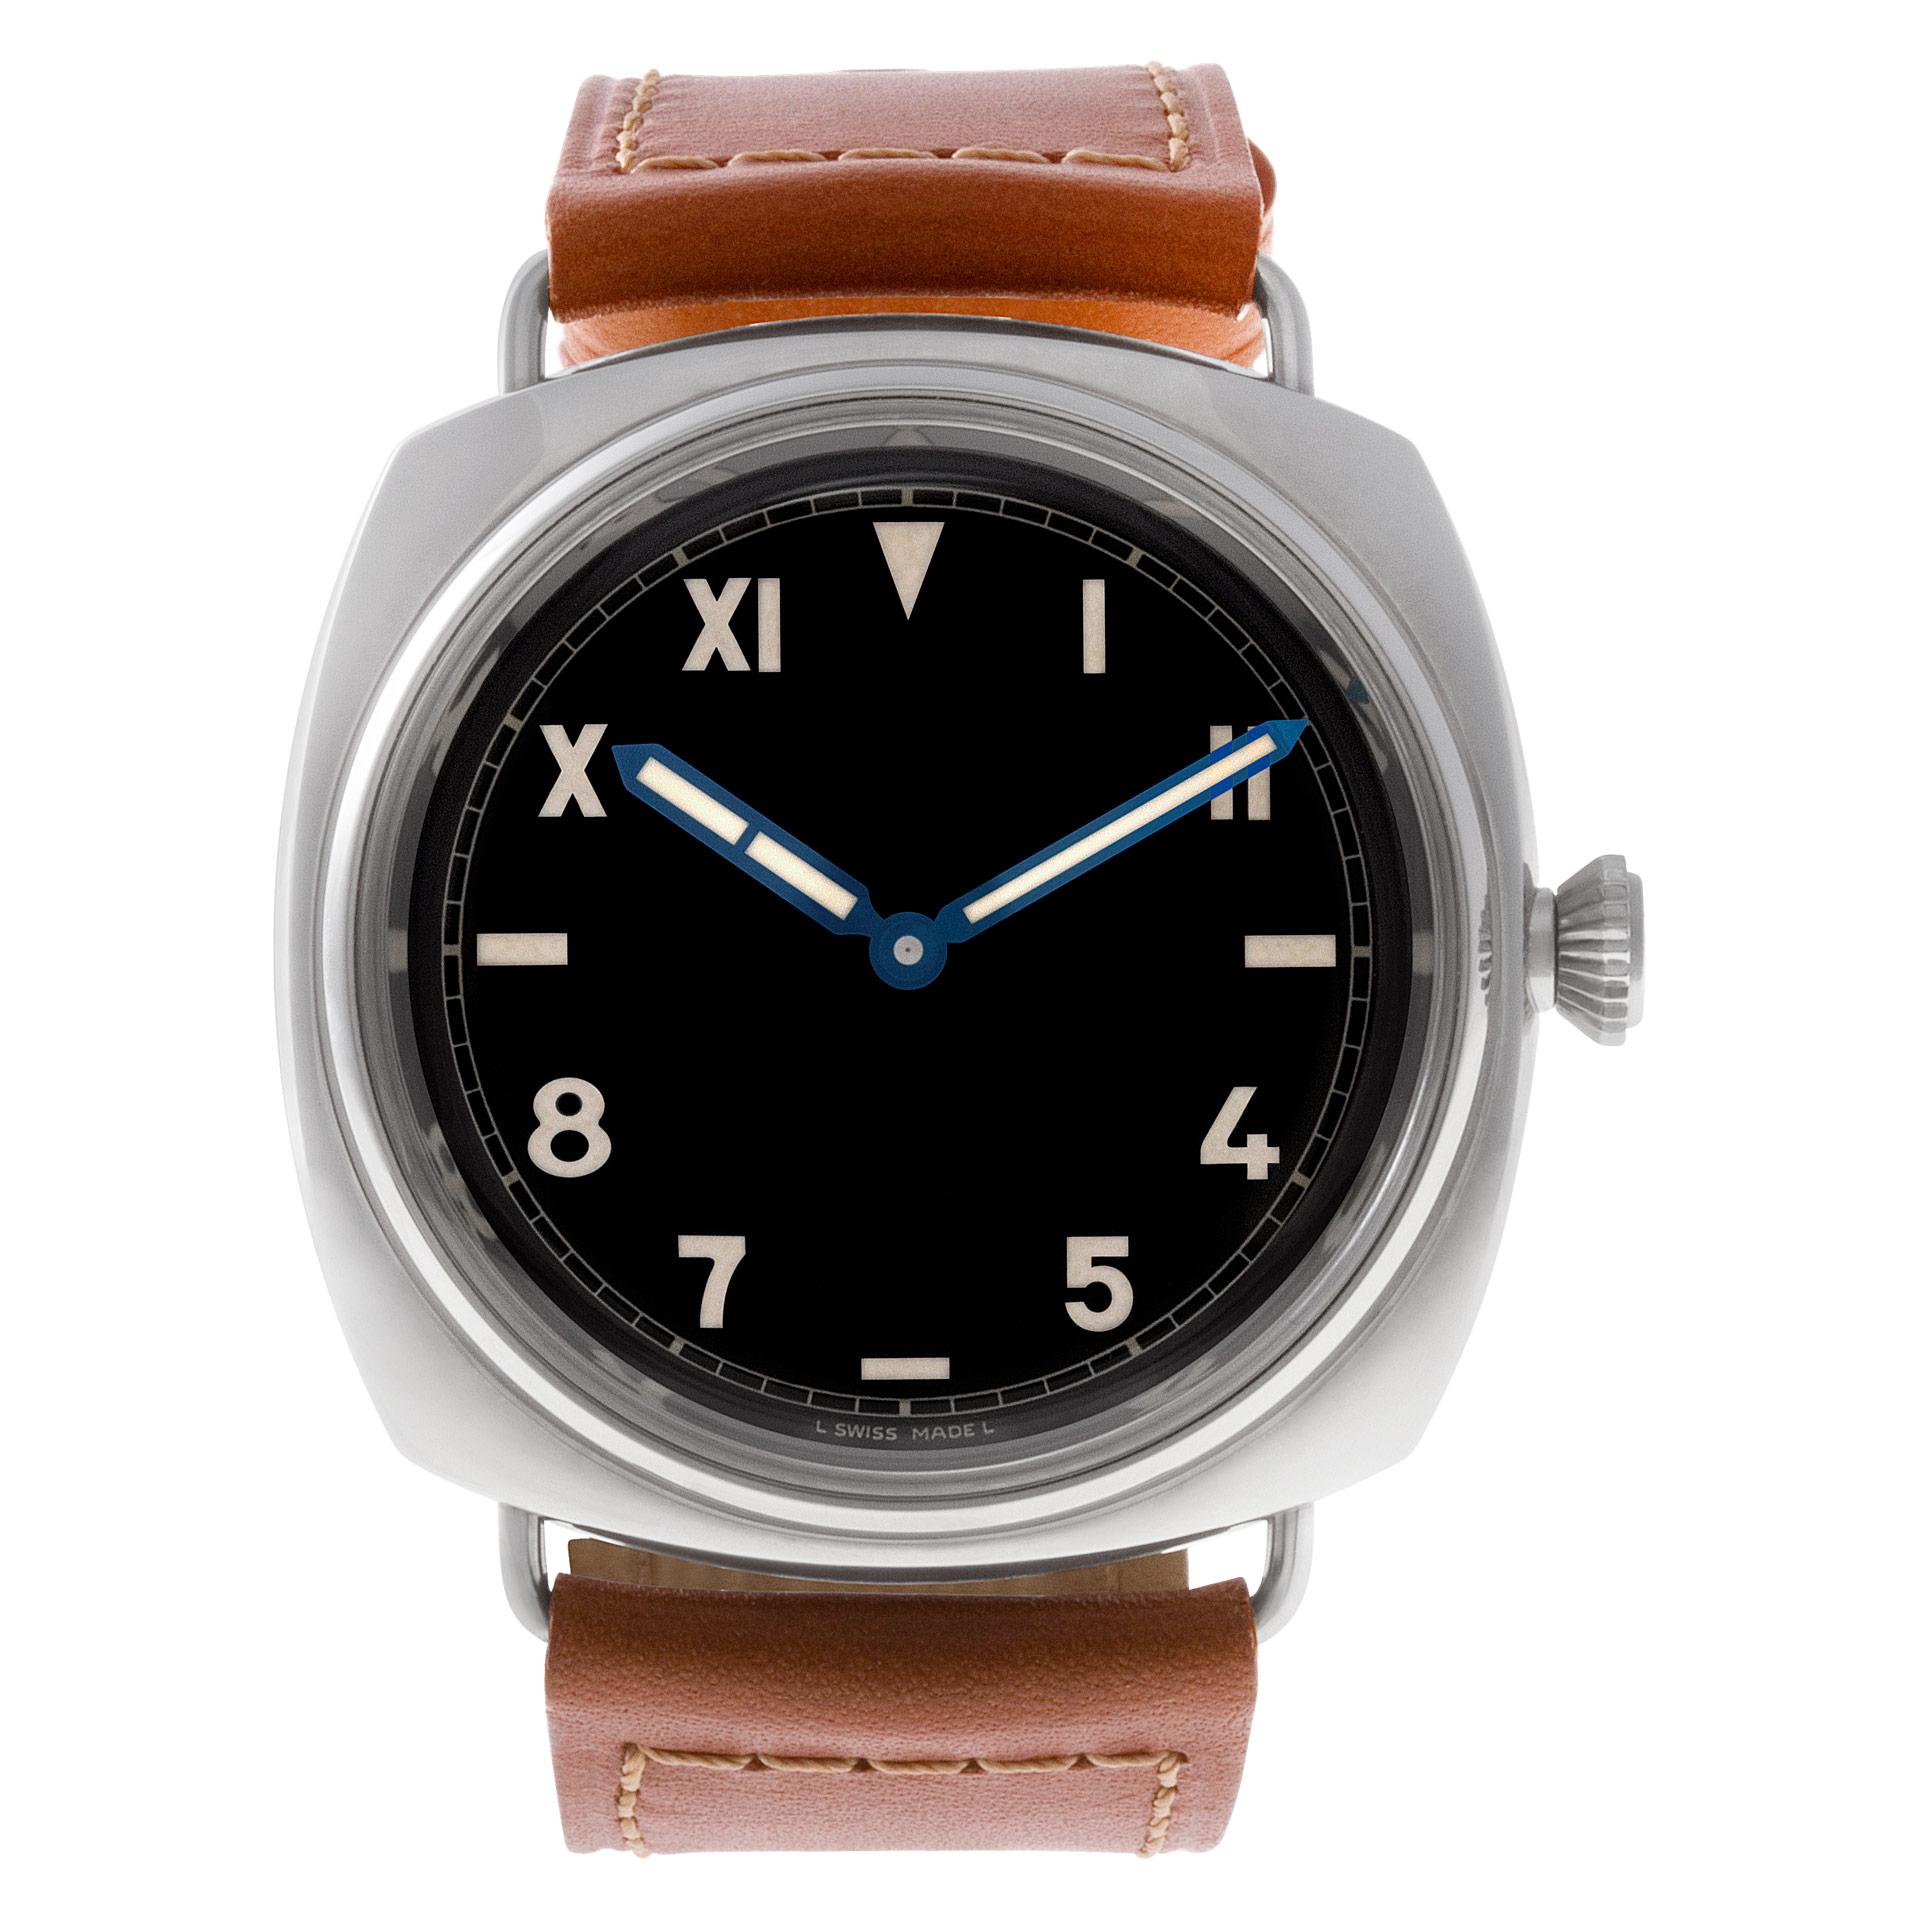 Panerai Radiomir with Limited Edition California Dial Wristwatch For Sale